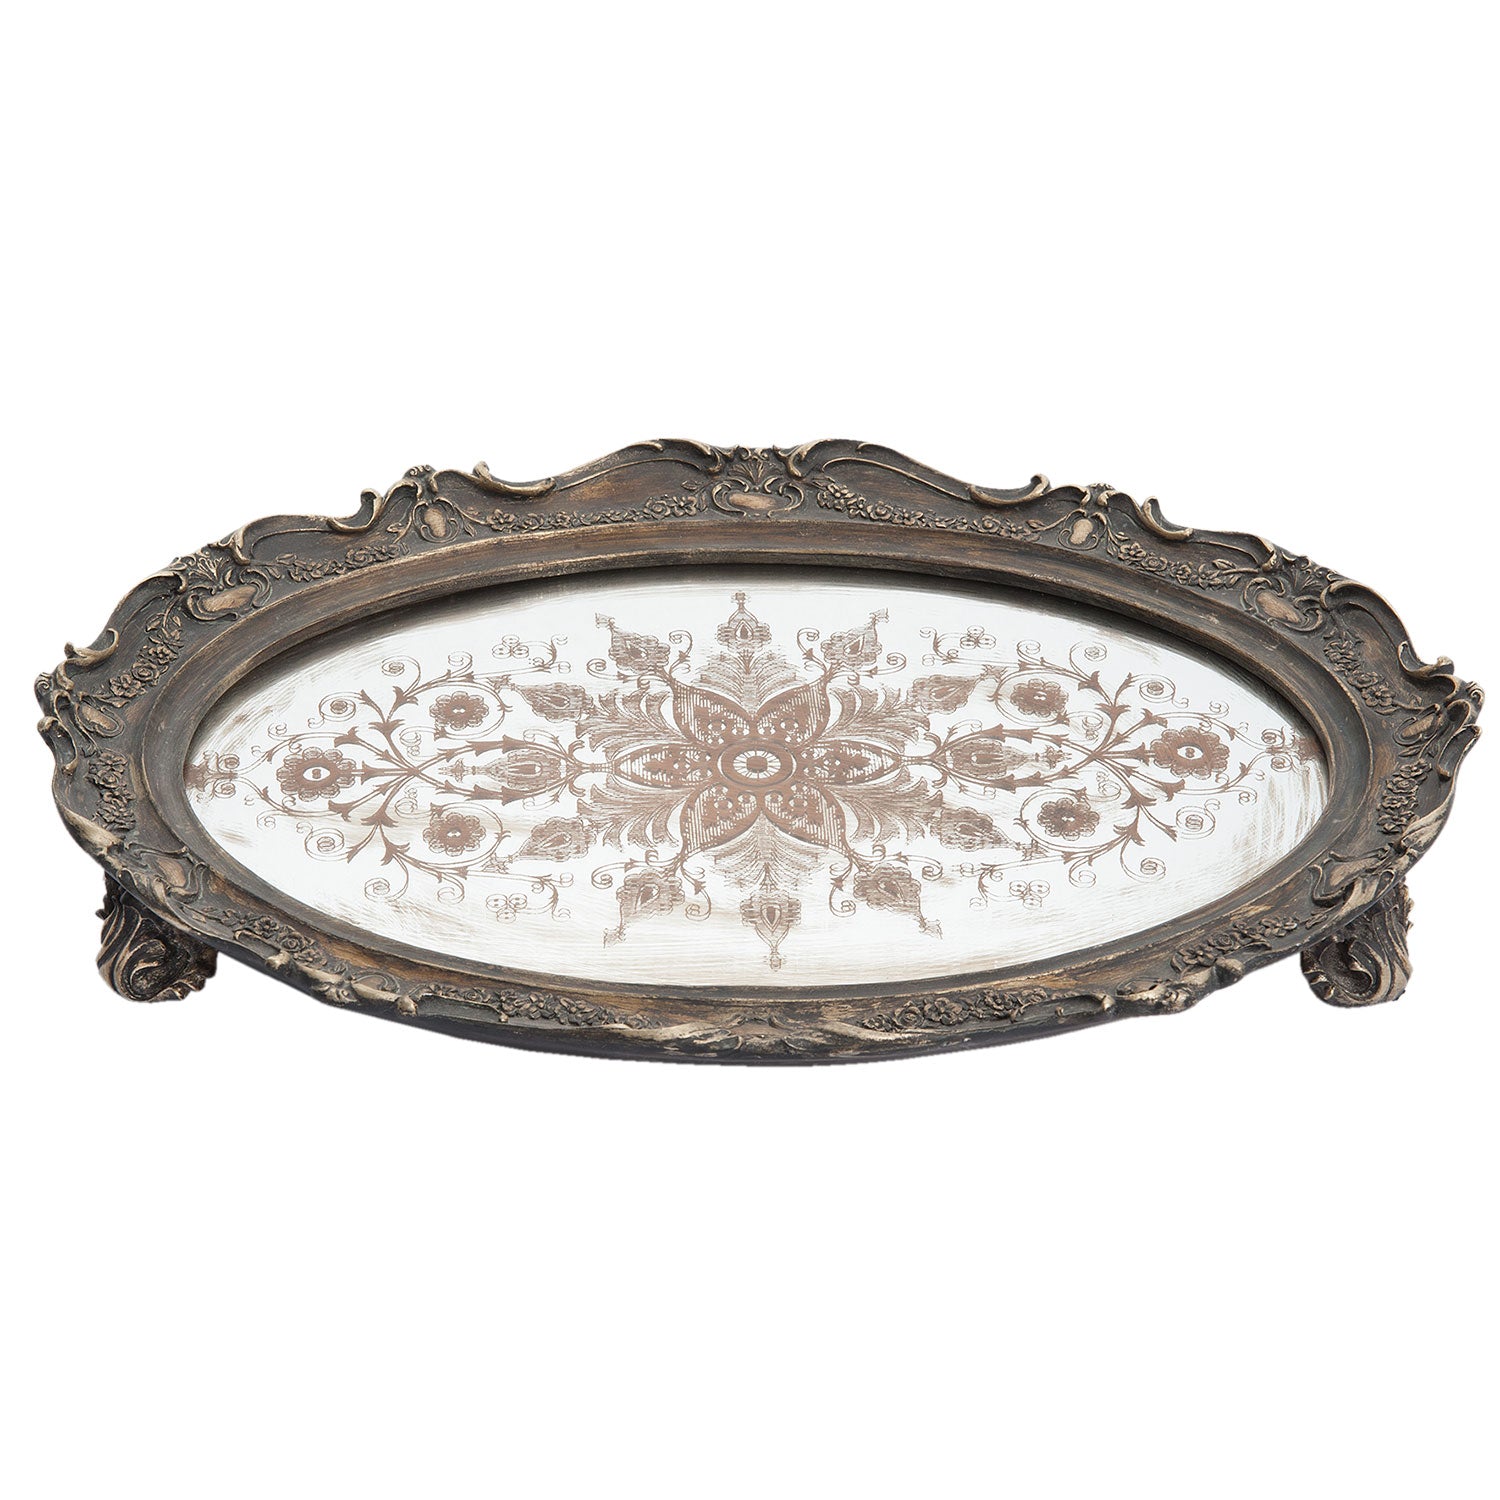 Oval mirror tray in old style